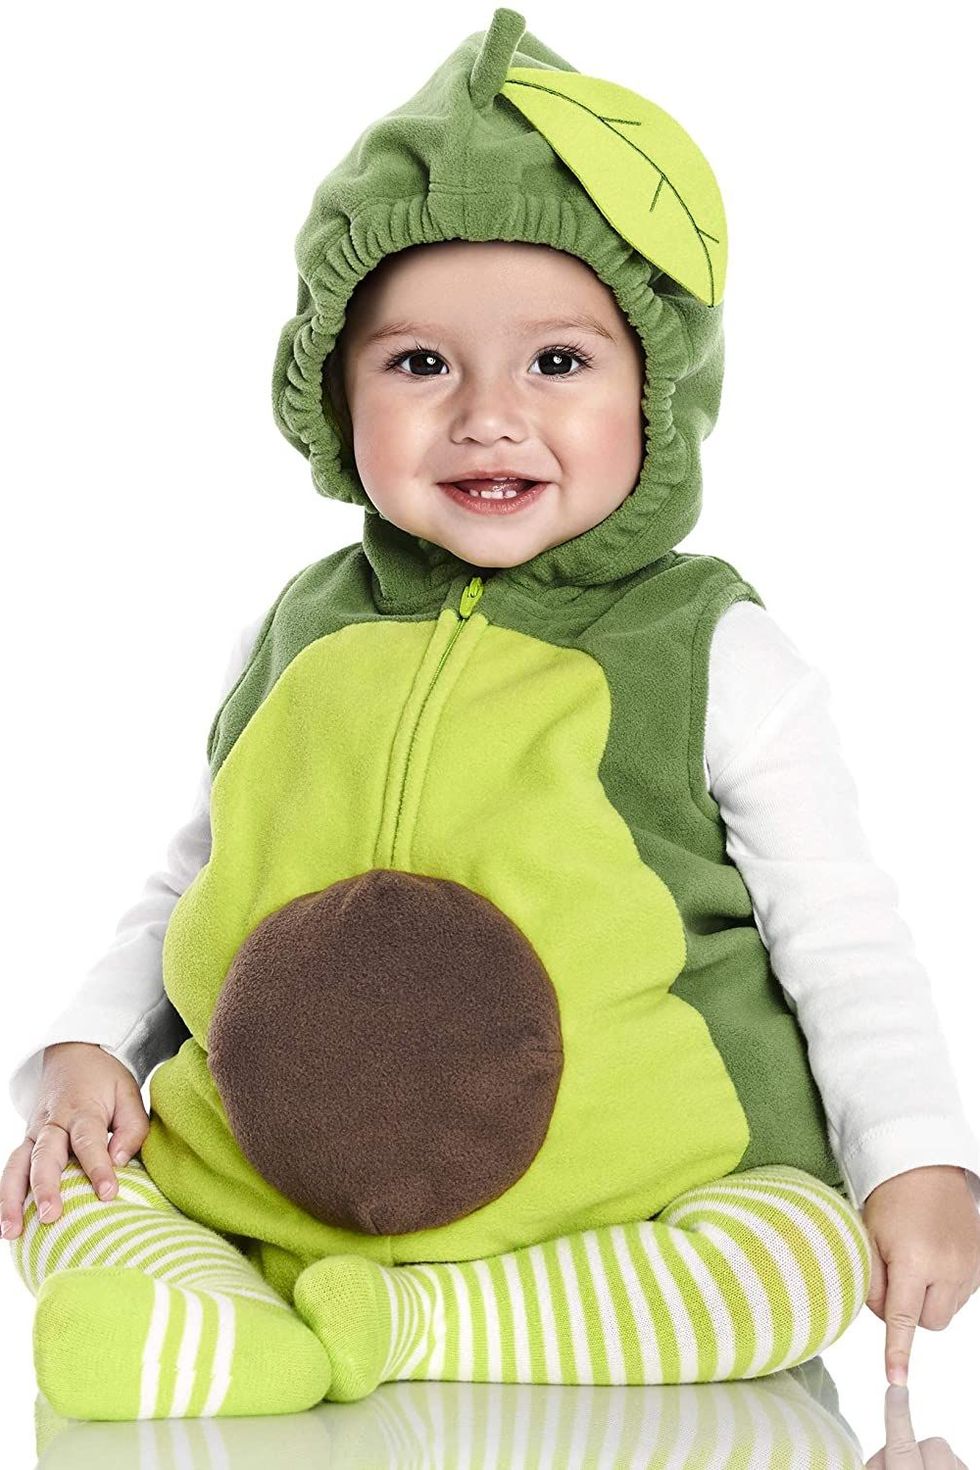 Amscan The Child Baby Yoda Halloween Costume for Infants, Star Wars and The  Mandalorian, Includes Robe, Hood